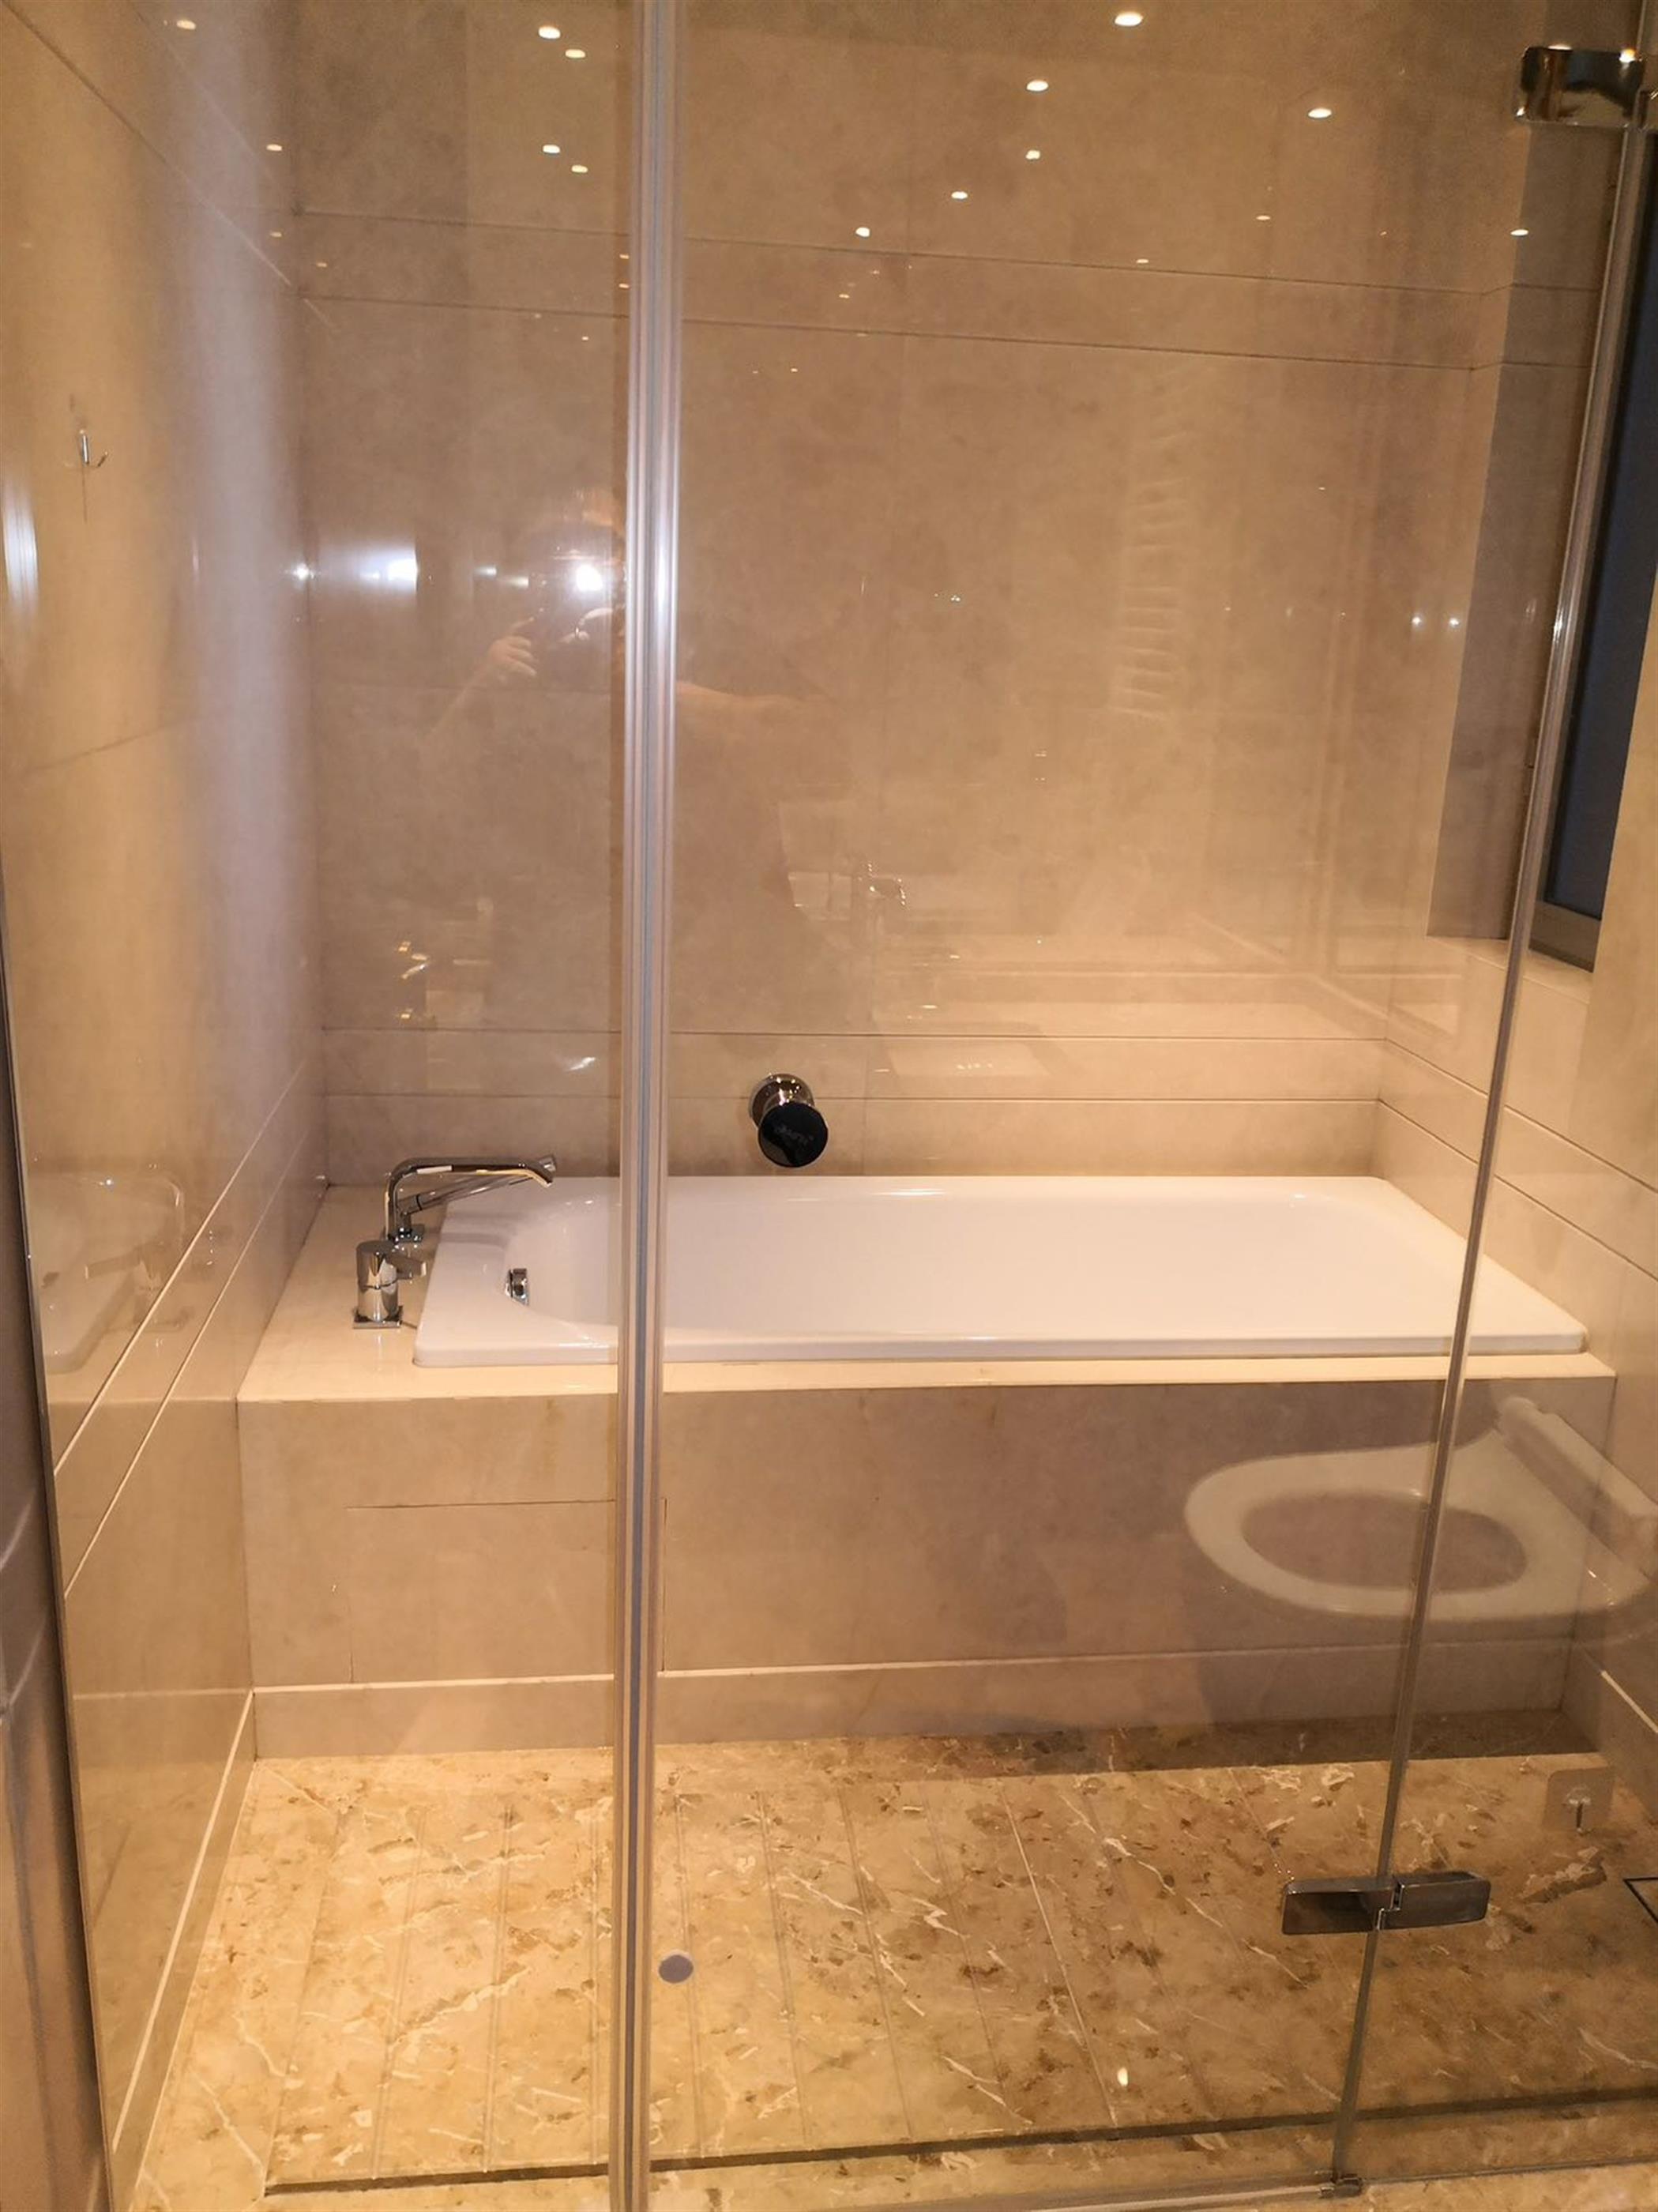 bathtub / shower Deluxe Spacious Classic 3BR Apartment for Rent in Shanghai’s Xintiandi Neighborhood